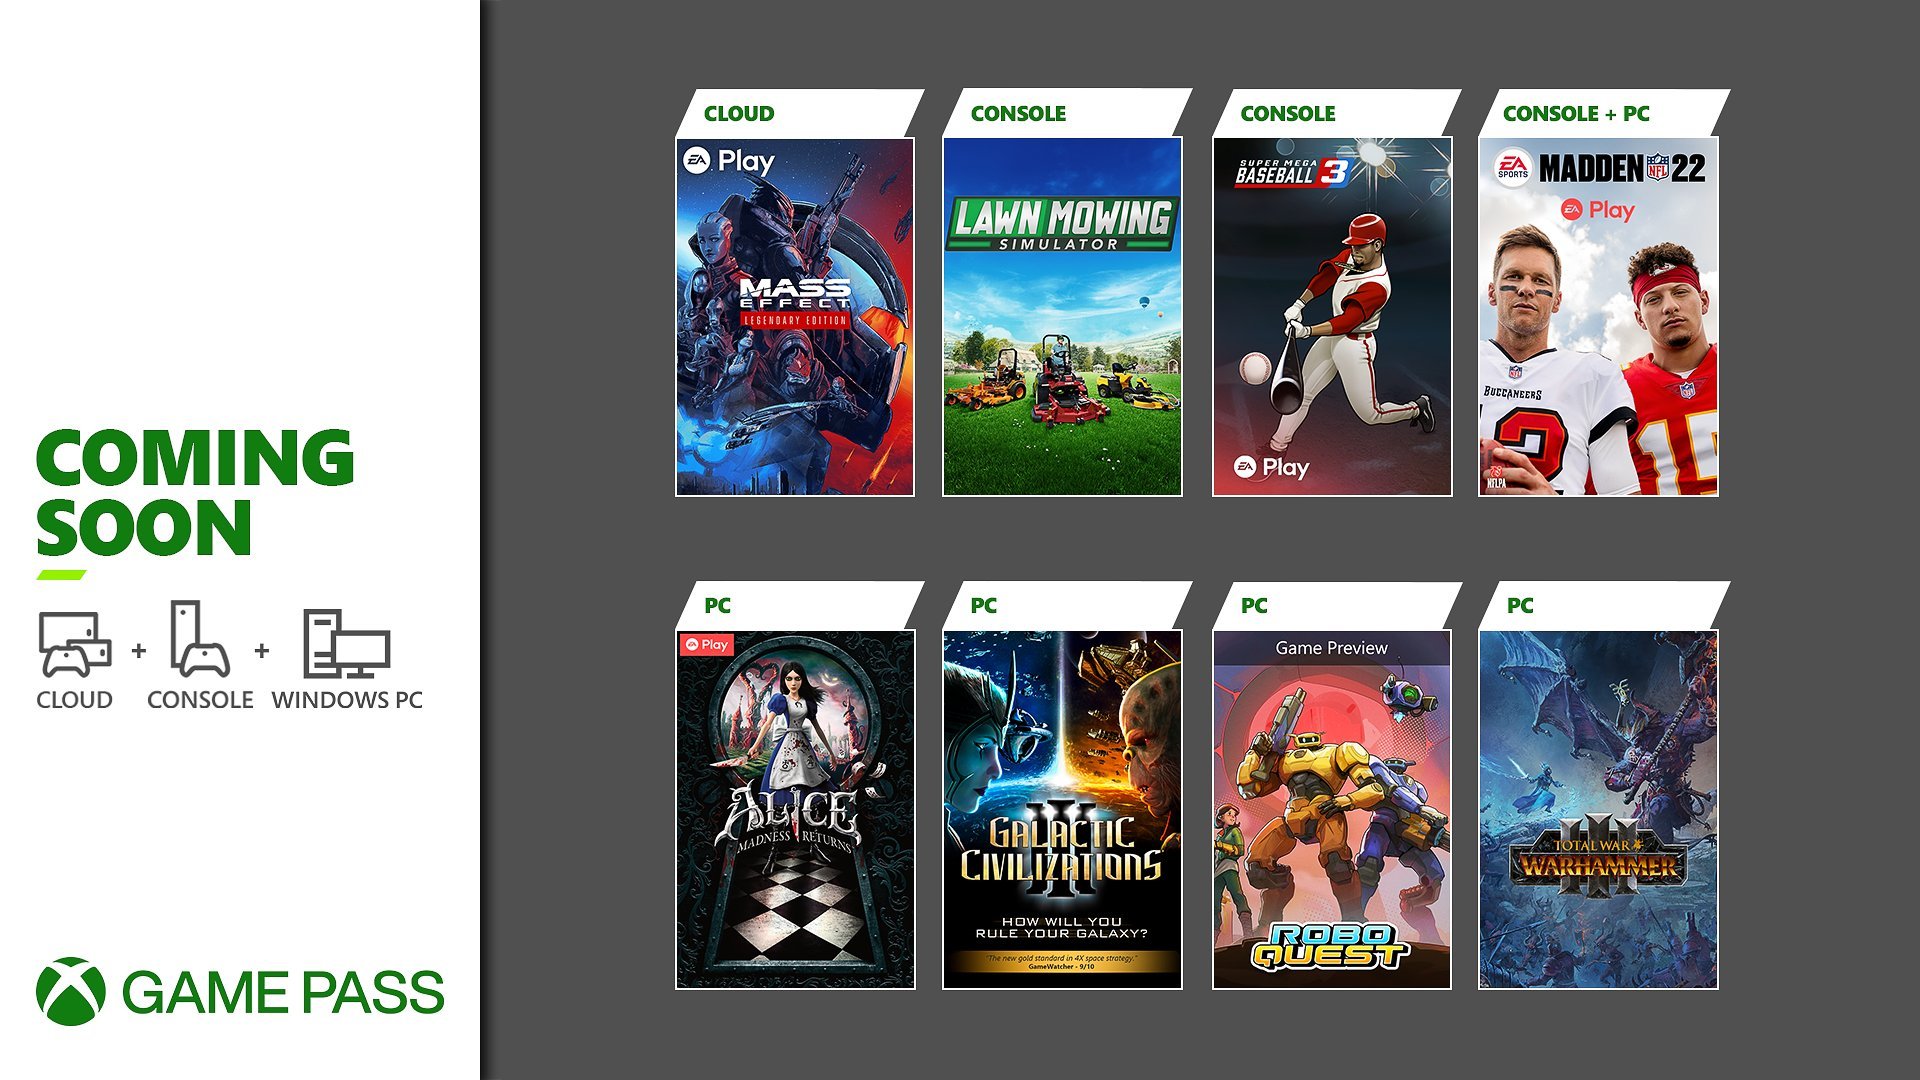 Xbox Game Pass Adds 7 New Games Ranging from Classic Xbox 360 to